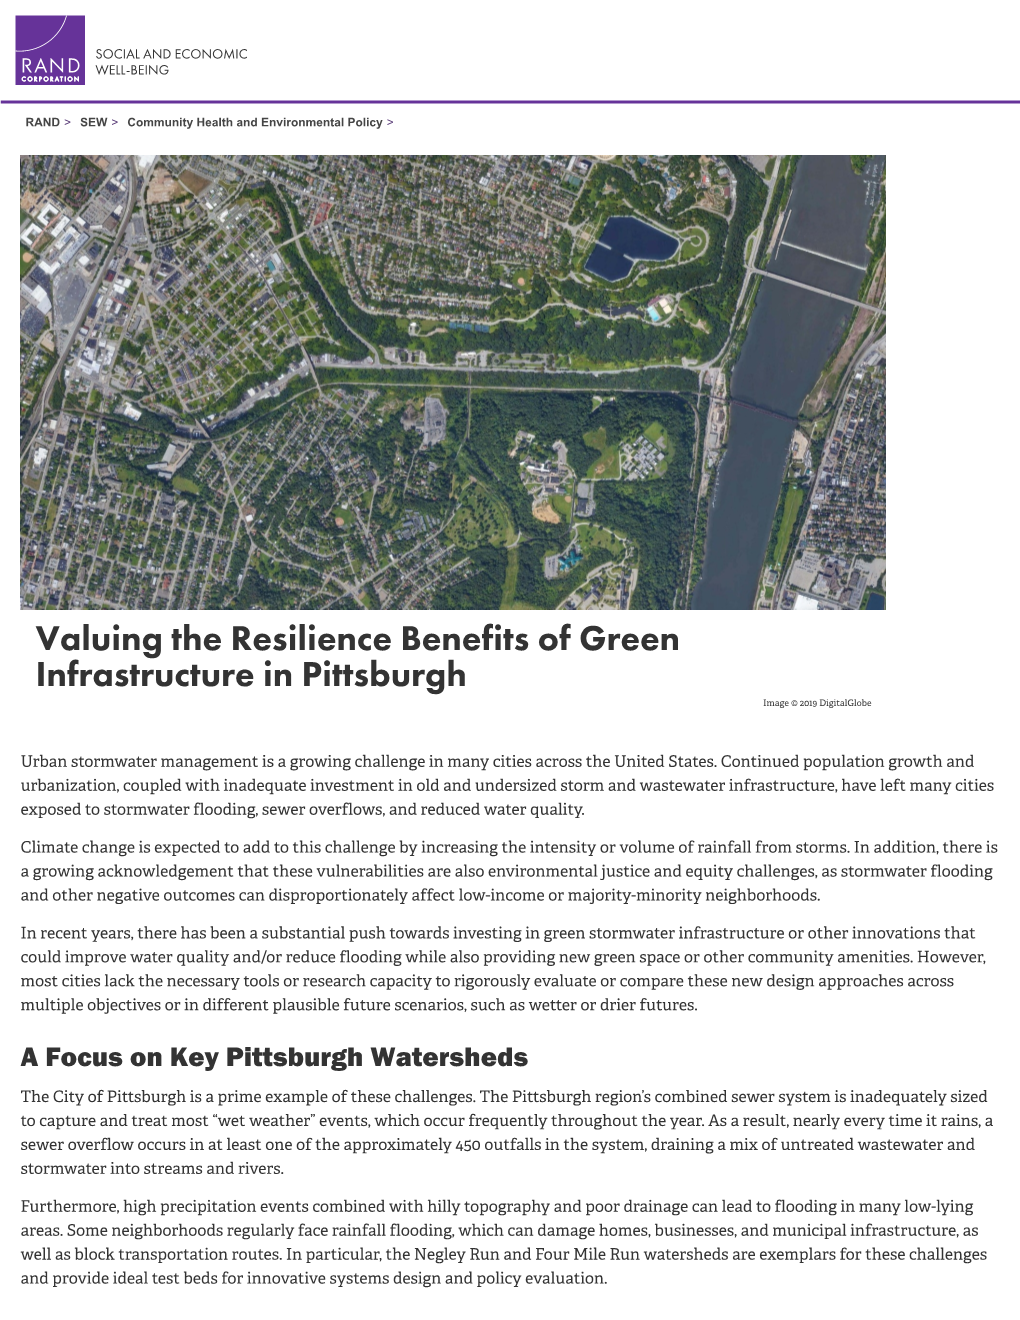 Valuing the Resilience Benefits of Green Infrastructure in Pittsburgh Image © 2019 Digitalglobe